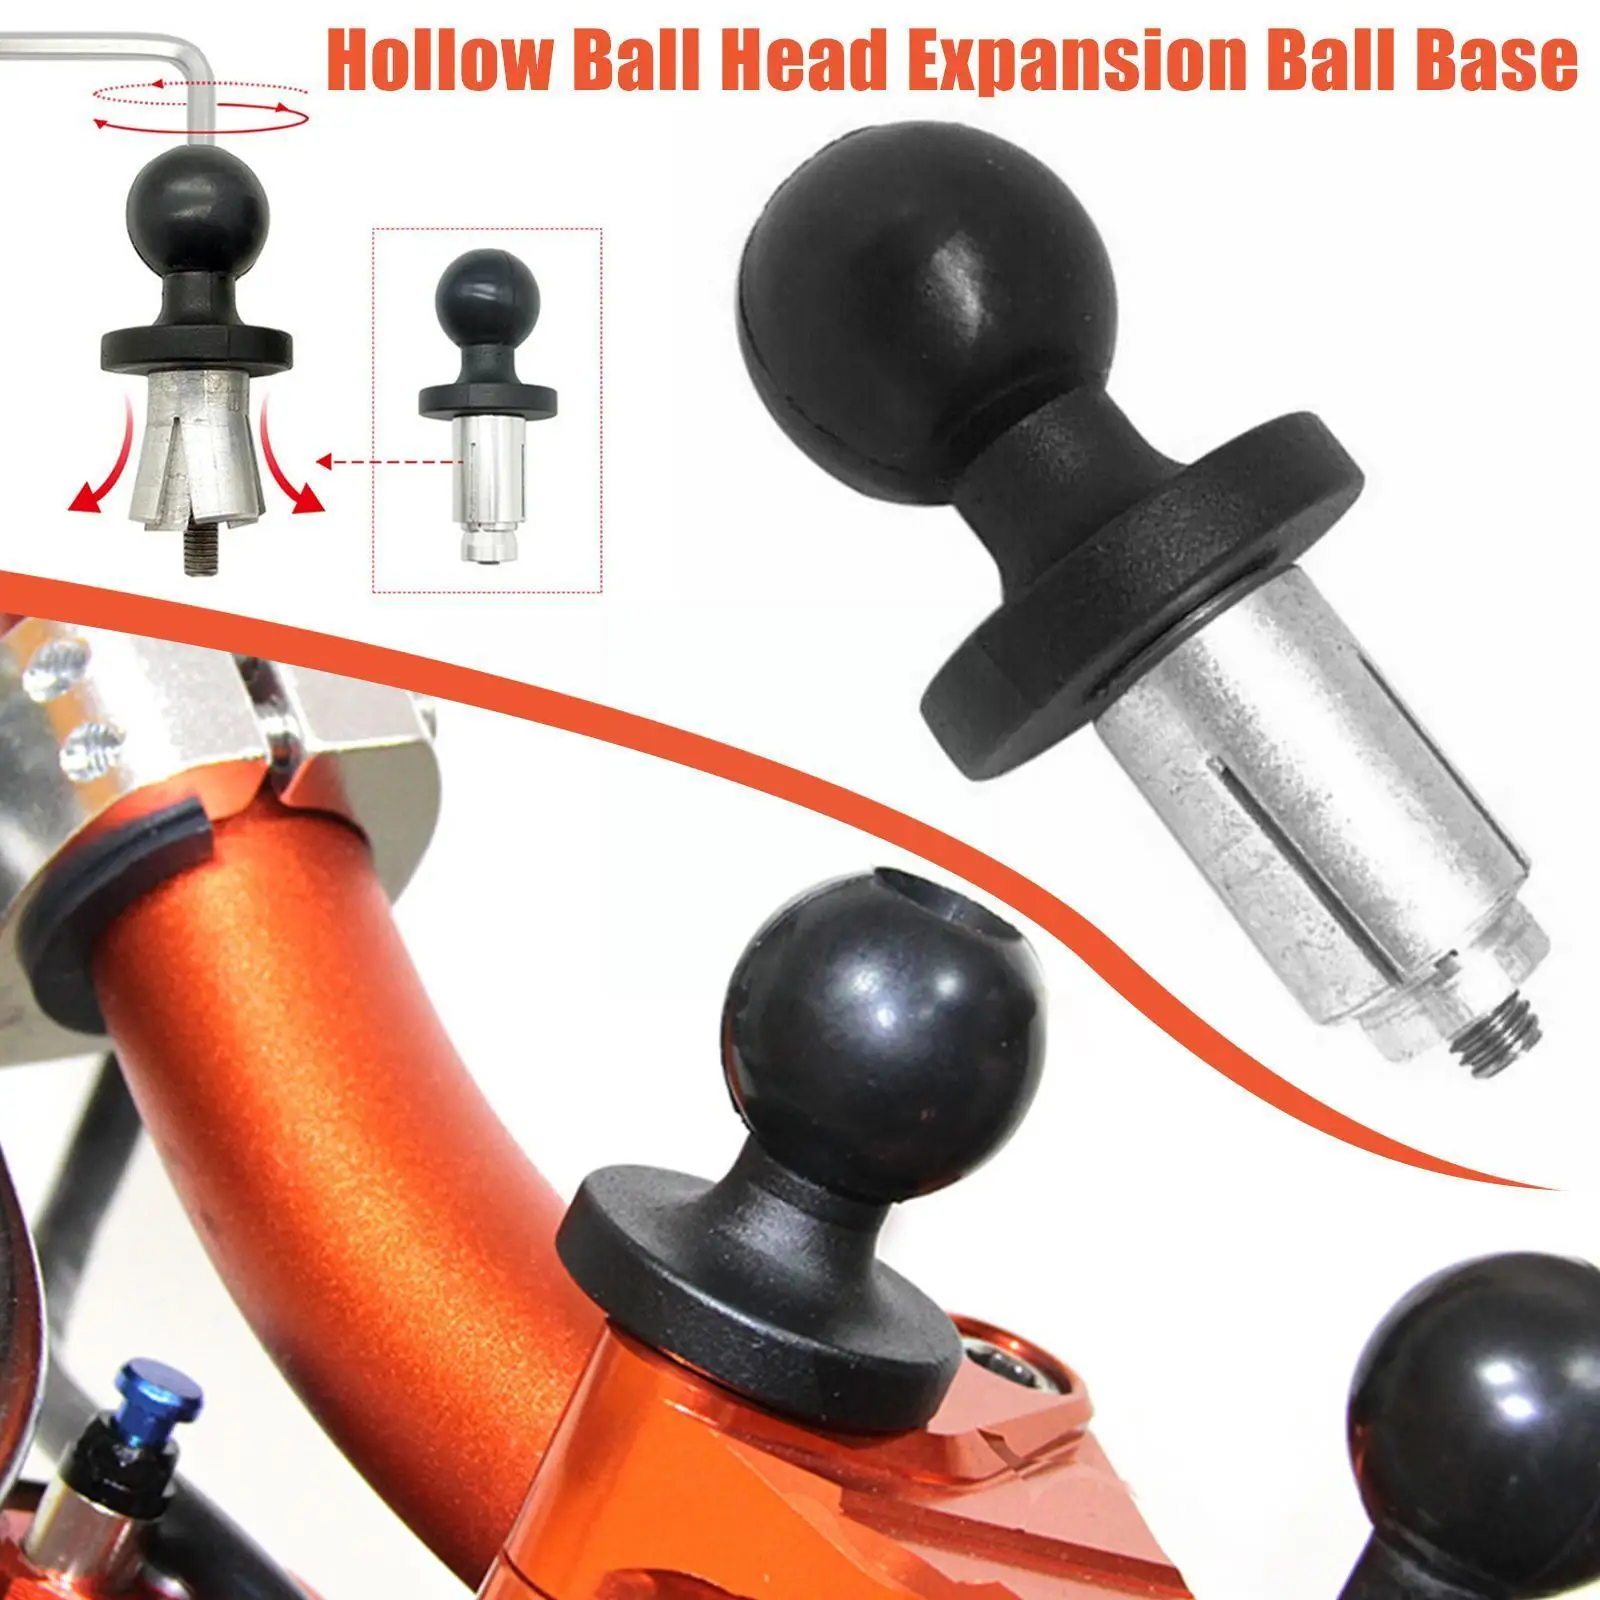 

Motorcycle Front Fork Stem Base Ball Adapter Rubber Base Head Compatible with RAM Mount for Gopro Ball Mount Adapter E6V4